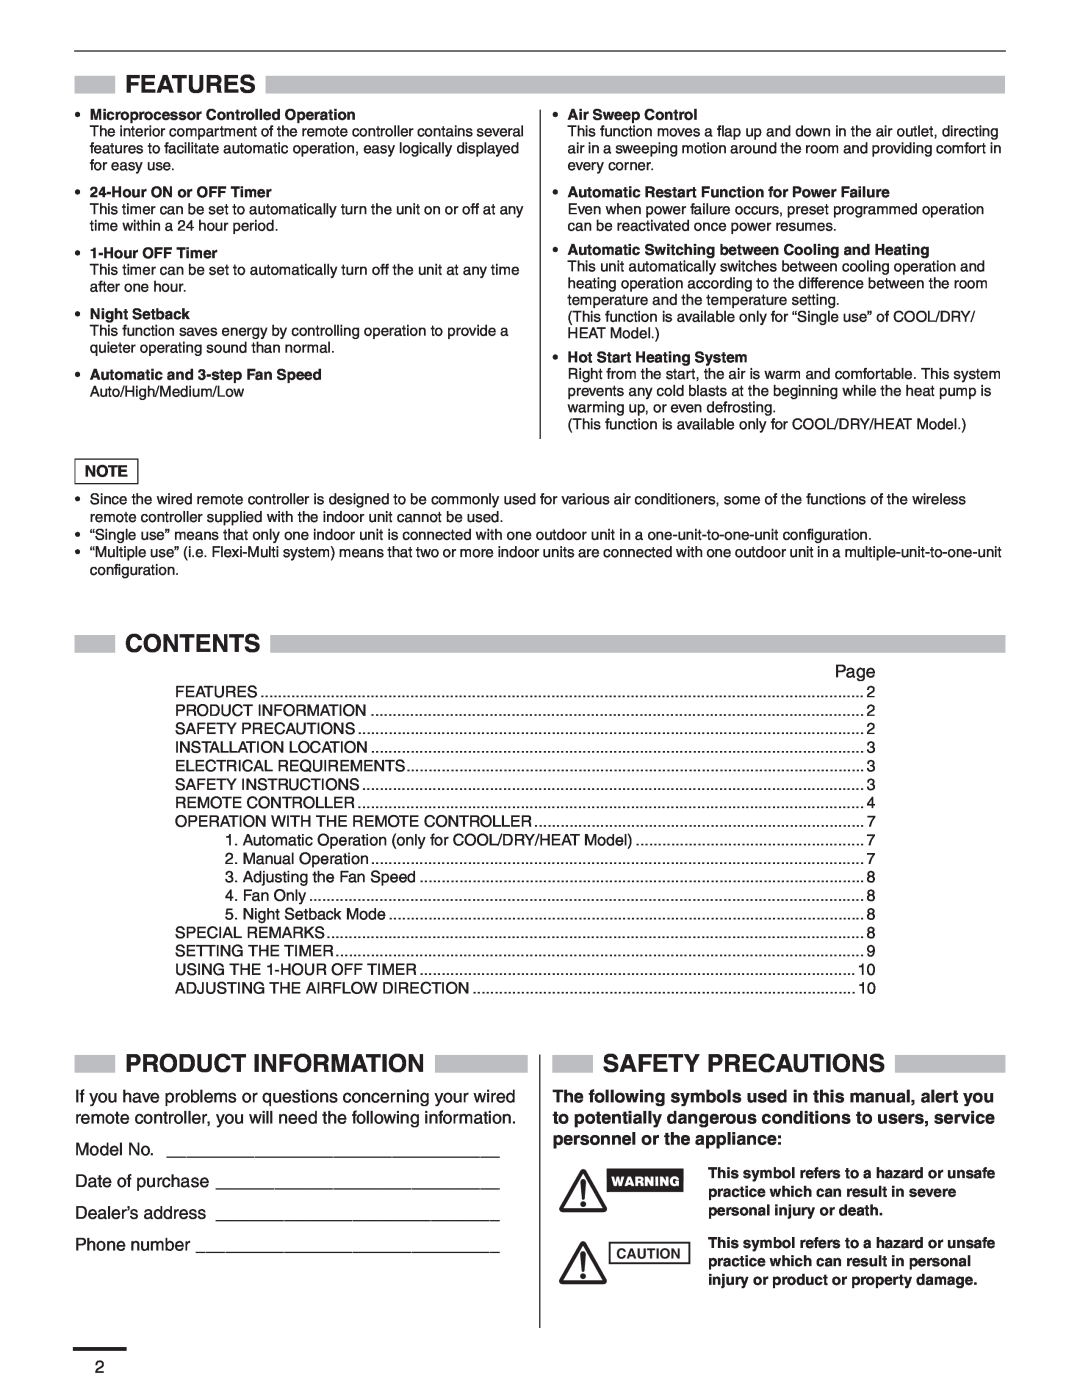 Panasonic R410A service manual Features, Contents, Product Information, Safety Precautions, Page 